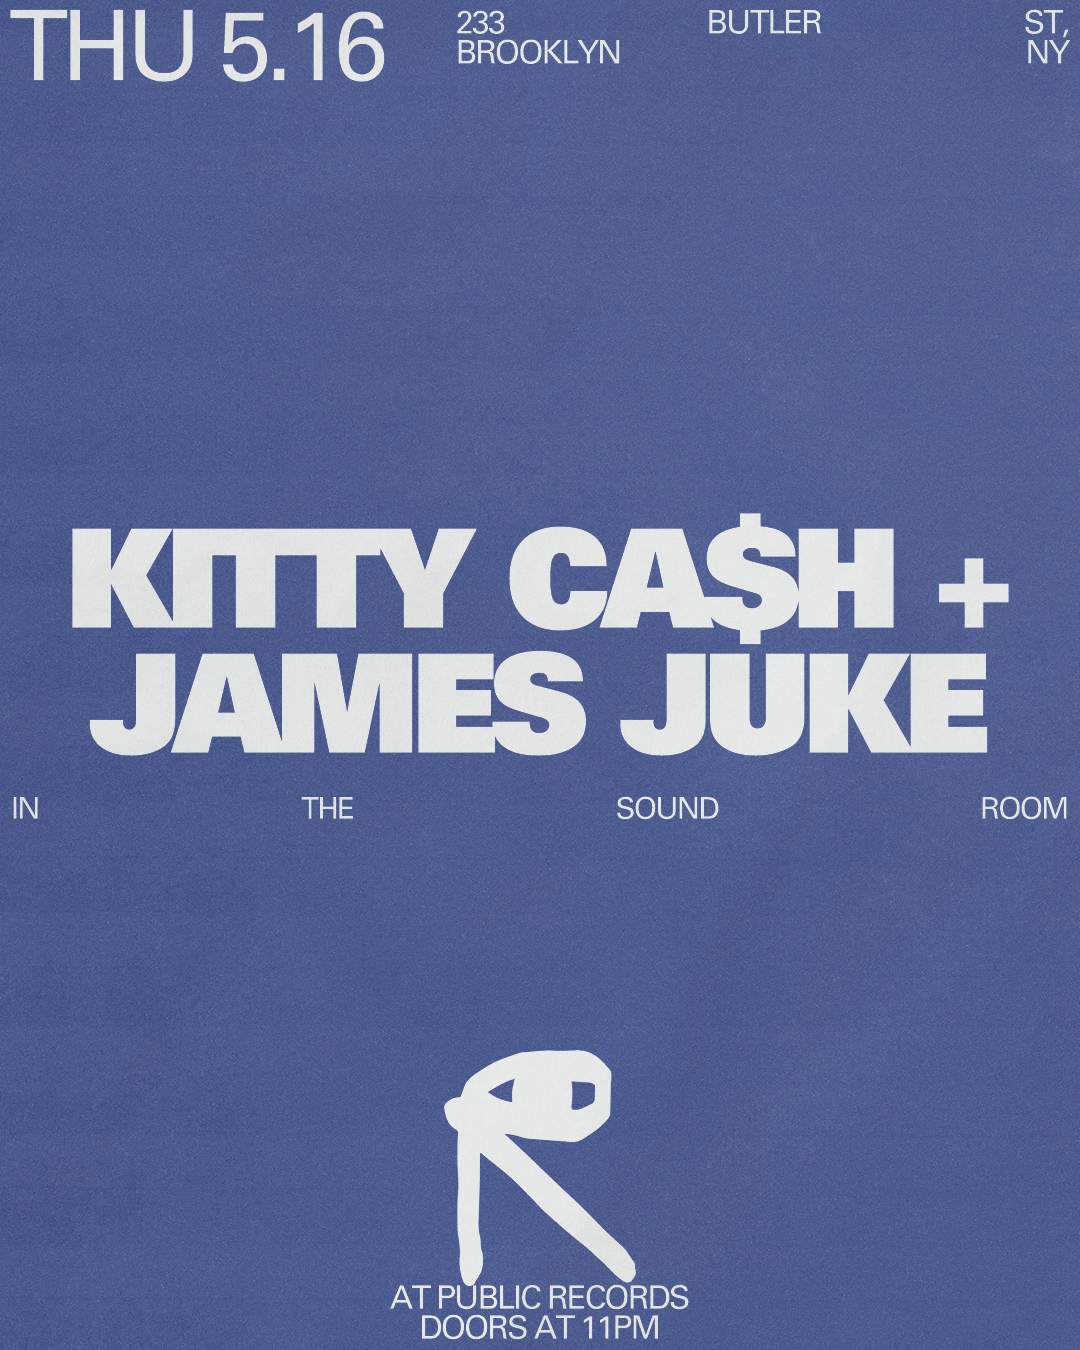 Kitty Ca$h Album Release Party with James Juke - Página frontal